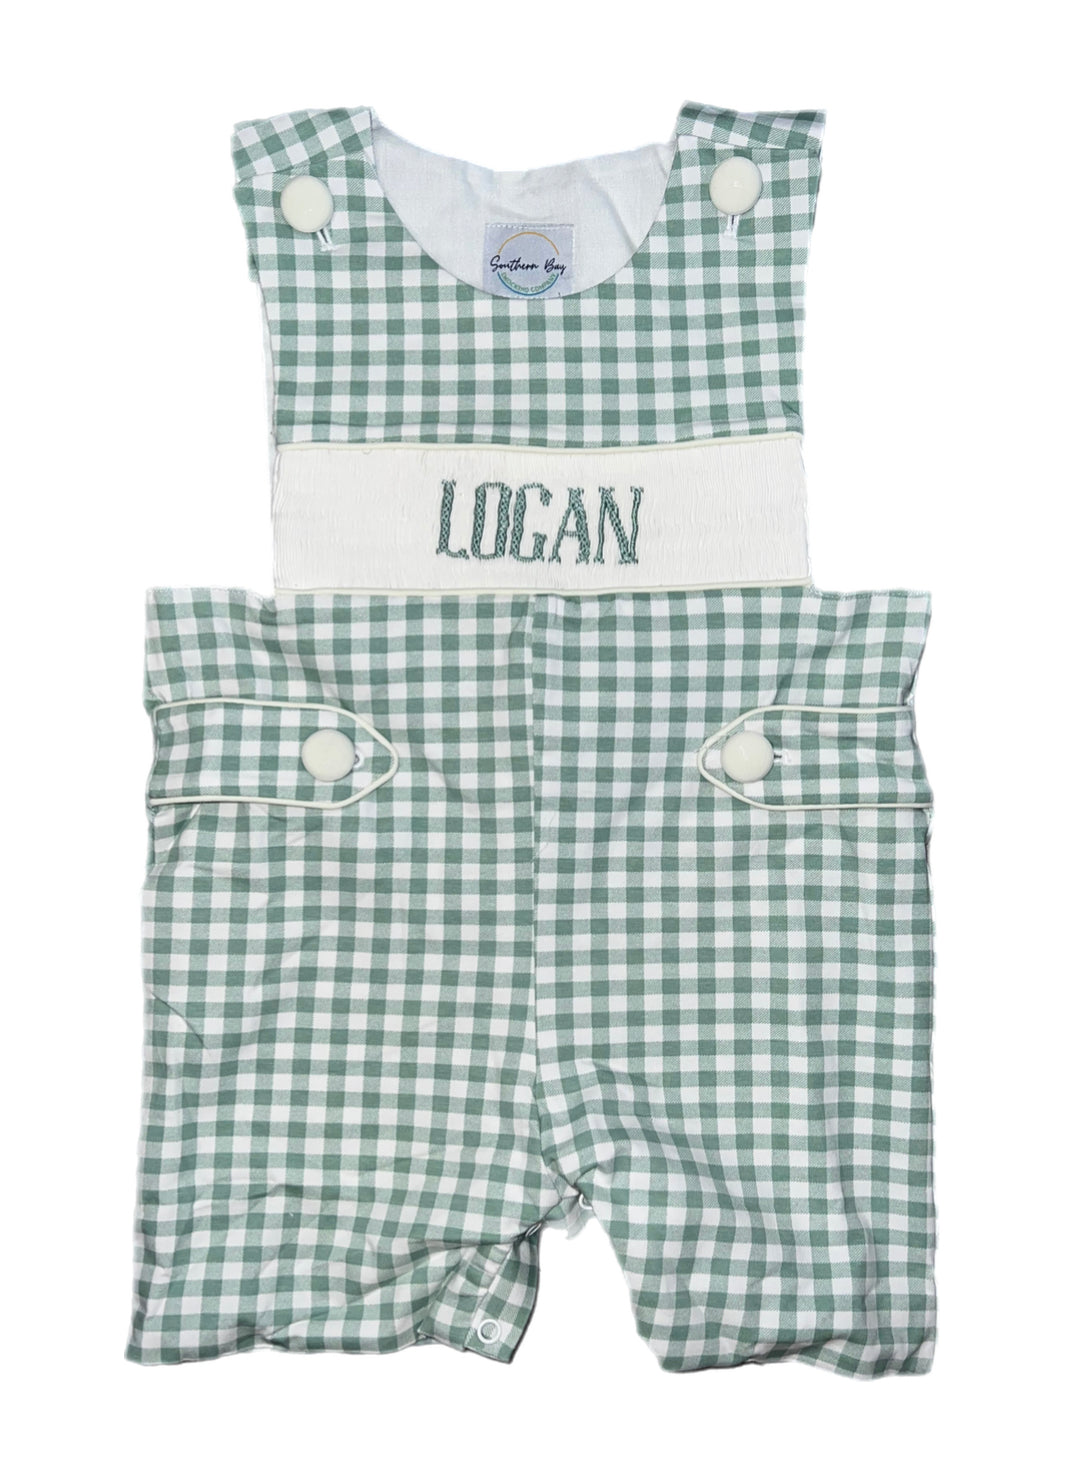 RTS: SBSC- Name Smock Collection- Floral & Gingham- Boys Knit Shortall “Logan”